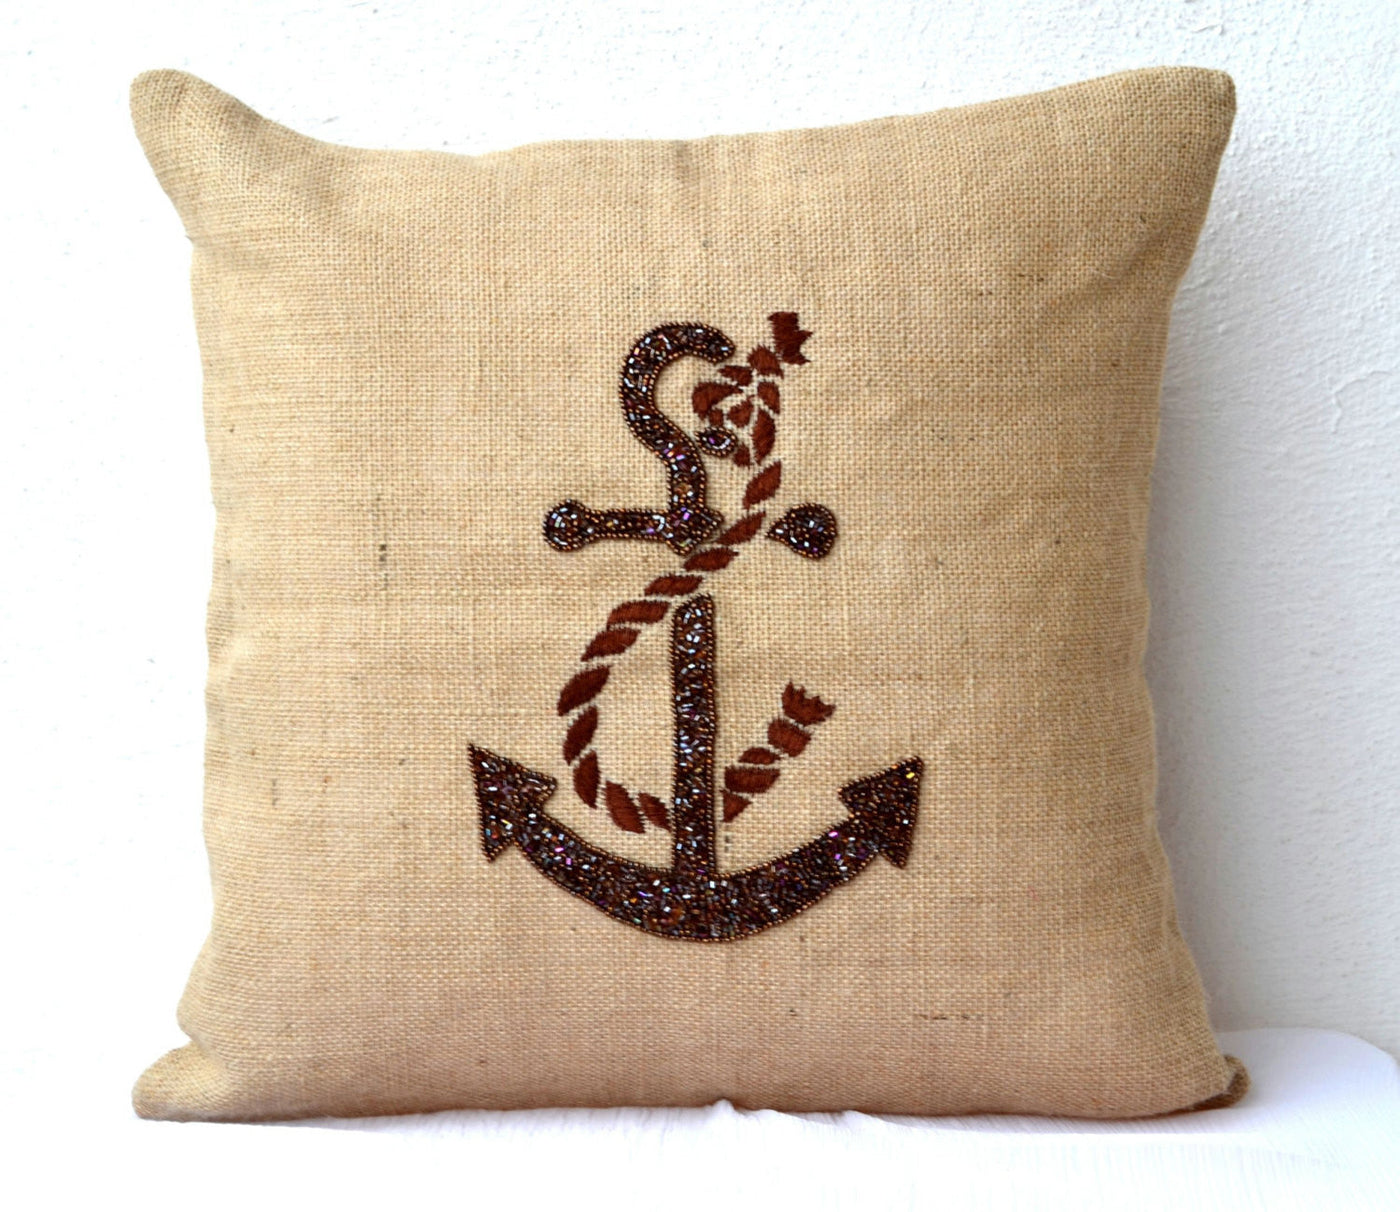 Buy handmade burlap nautical throw pillow covers with anchor sequin by Amore Beauté